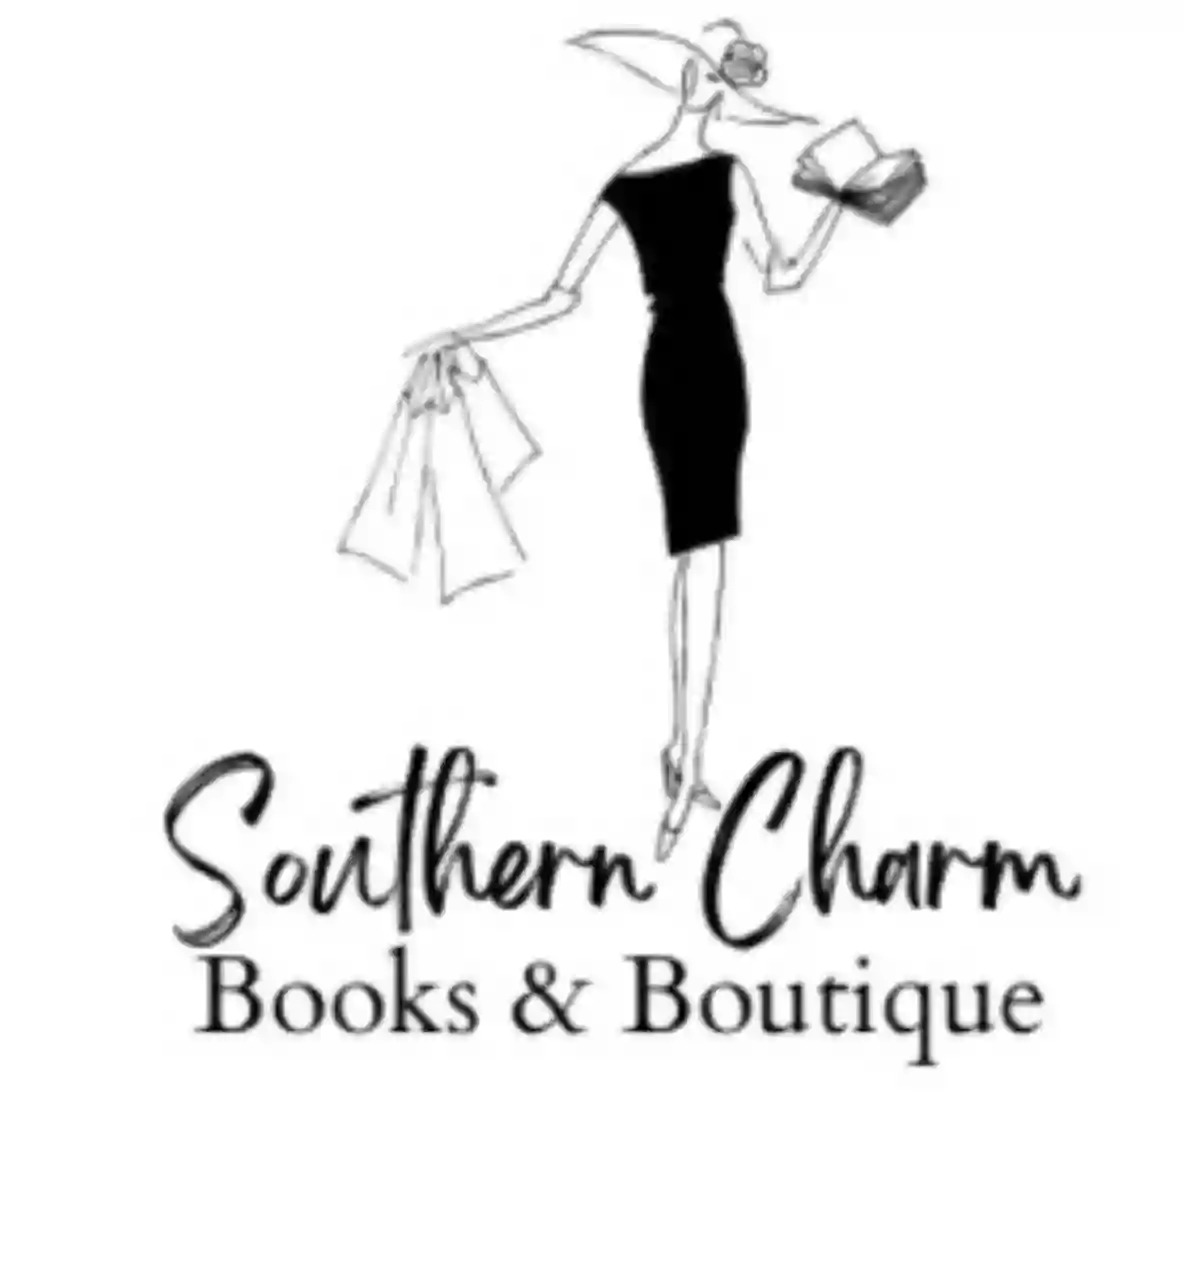 Southern Charm Books & Boutique